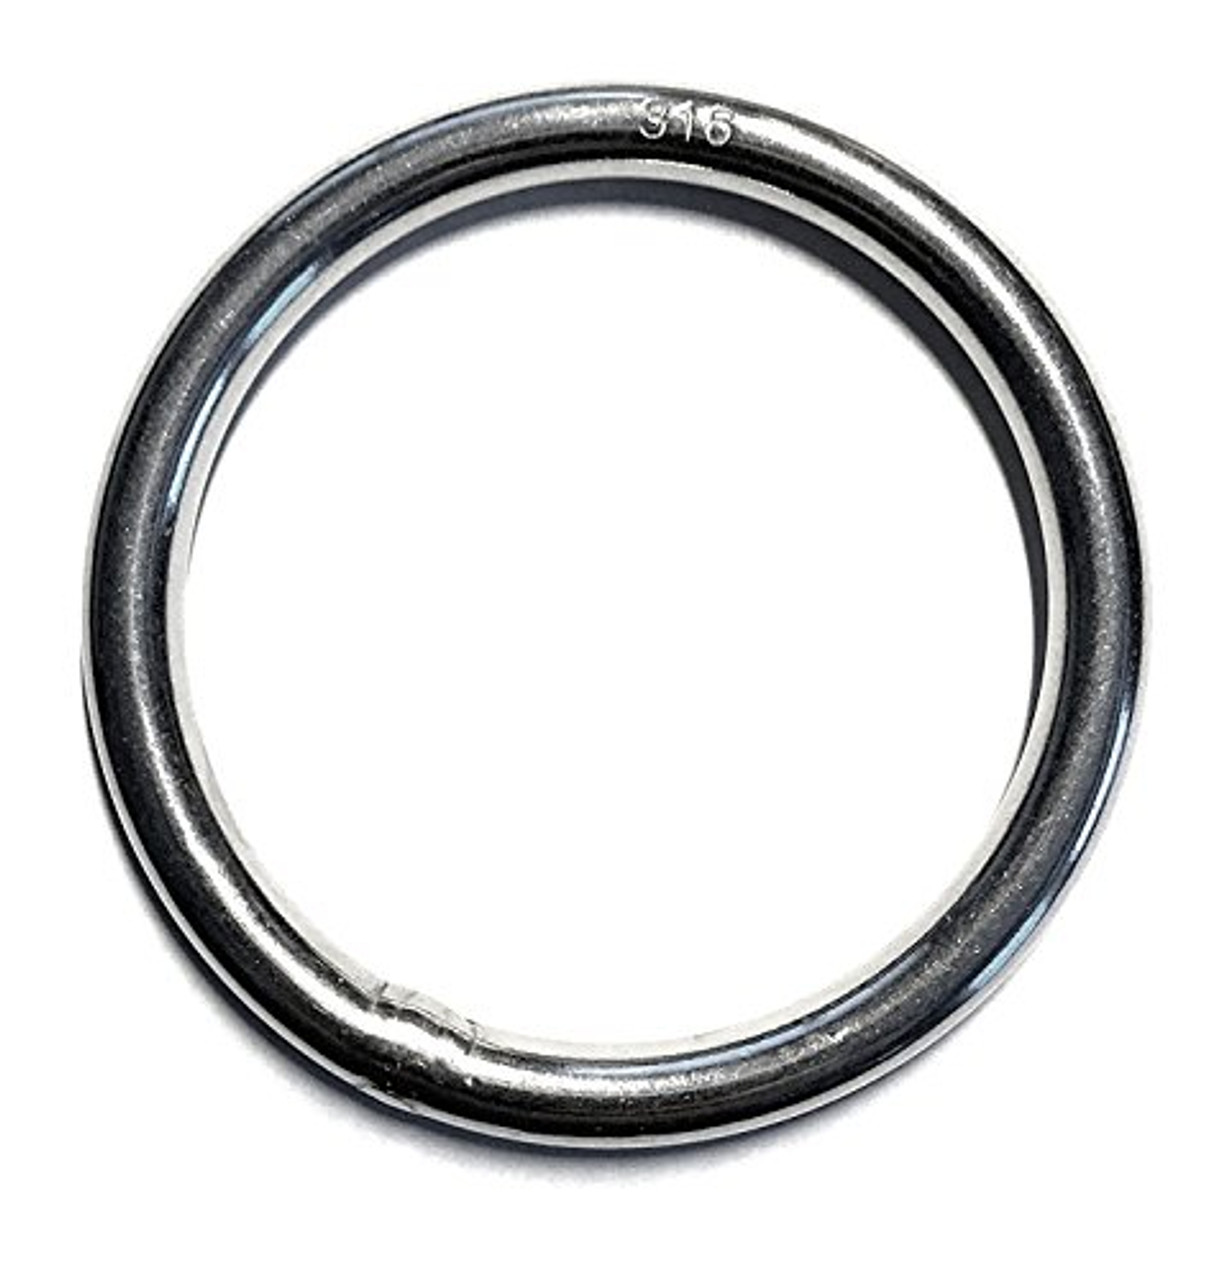 GOIS Stainless Steel Round Ring 5/8 x 6